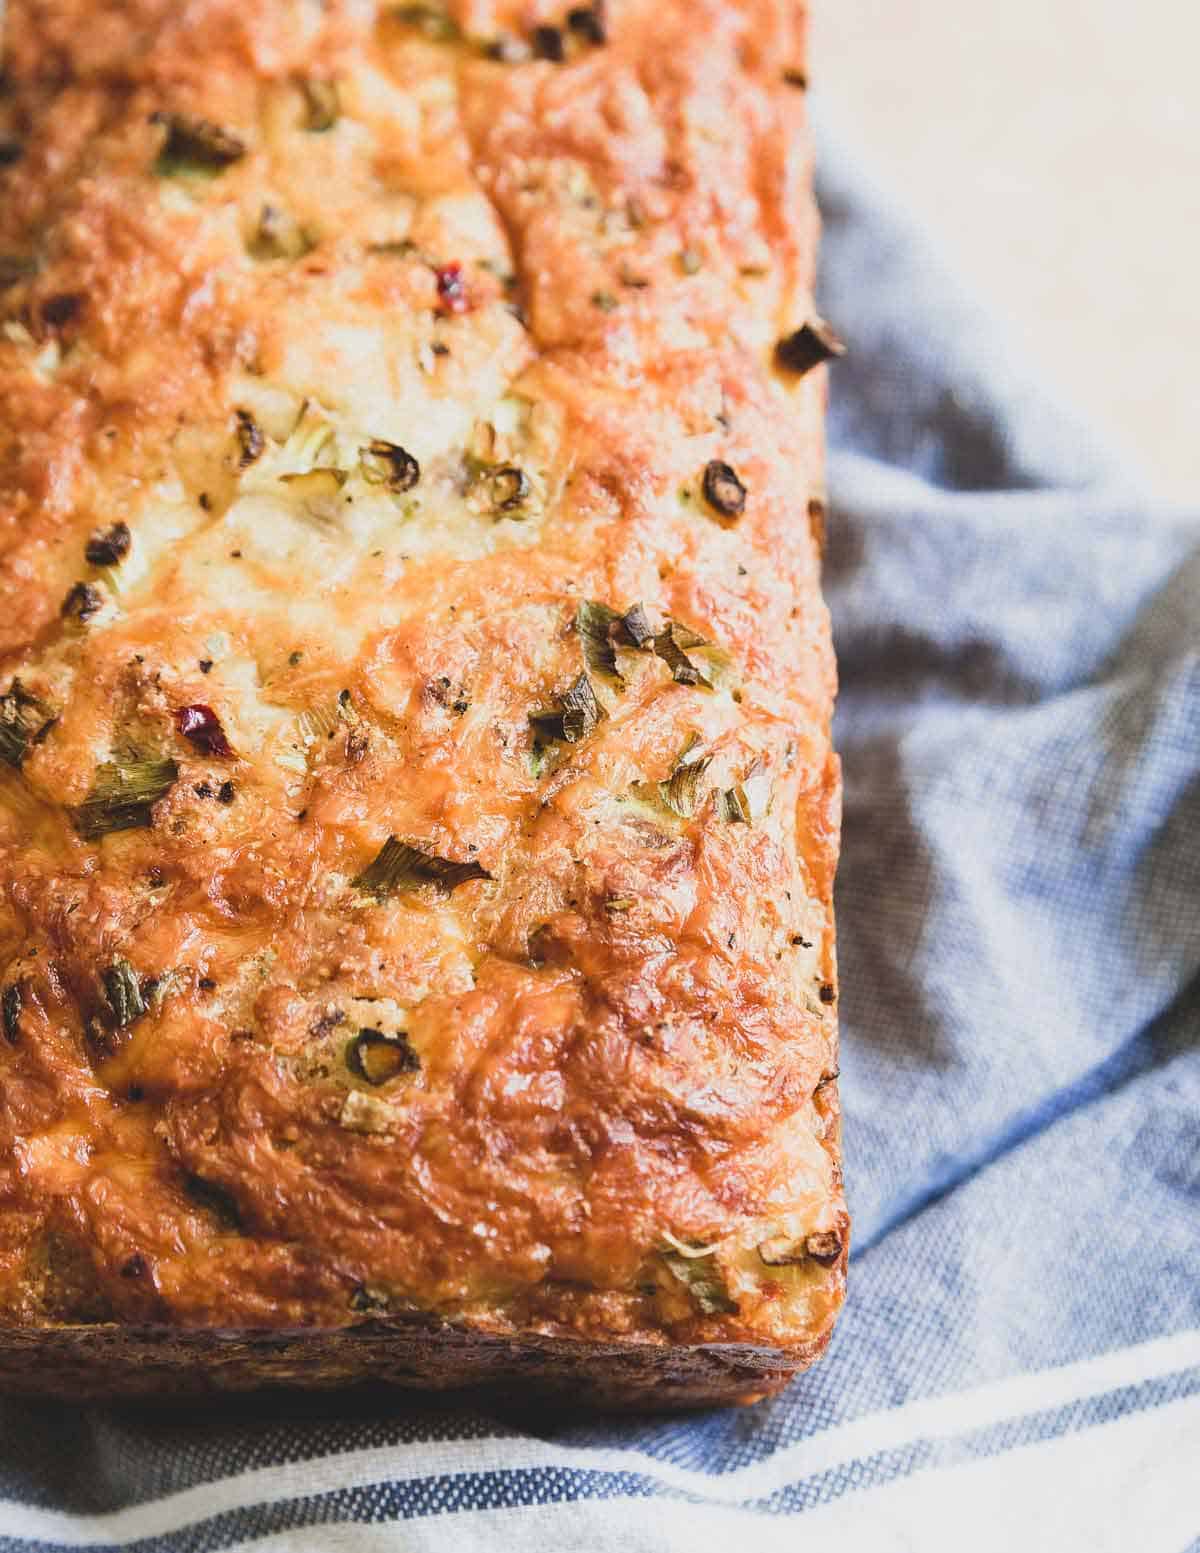 This cheesy zucchini bread is hearty, savory and filled with pepper jack cheese. The perfect way to use up fresh summer zucchini!